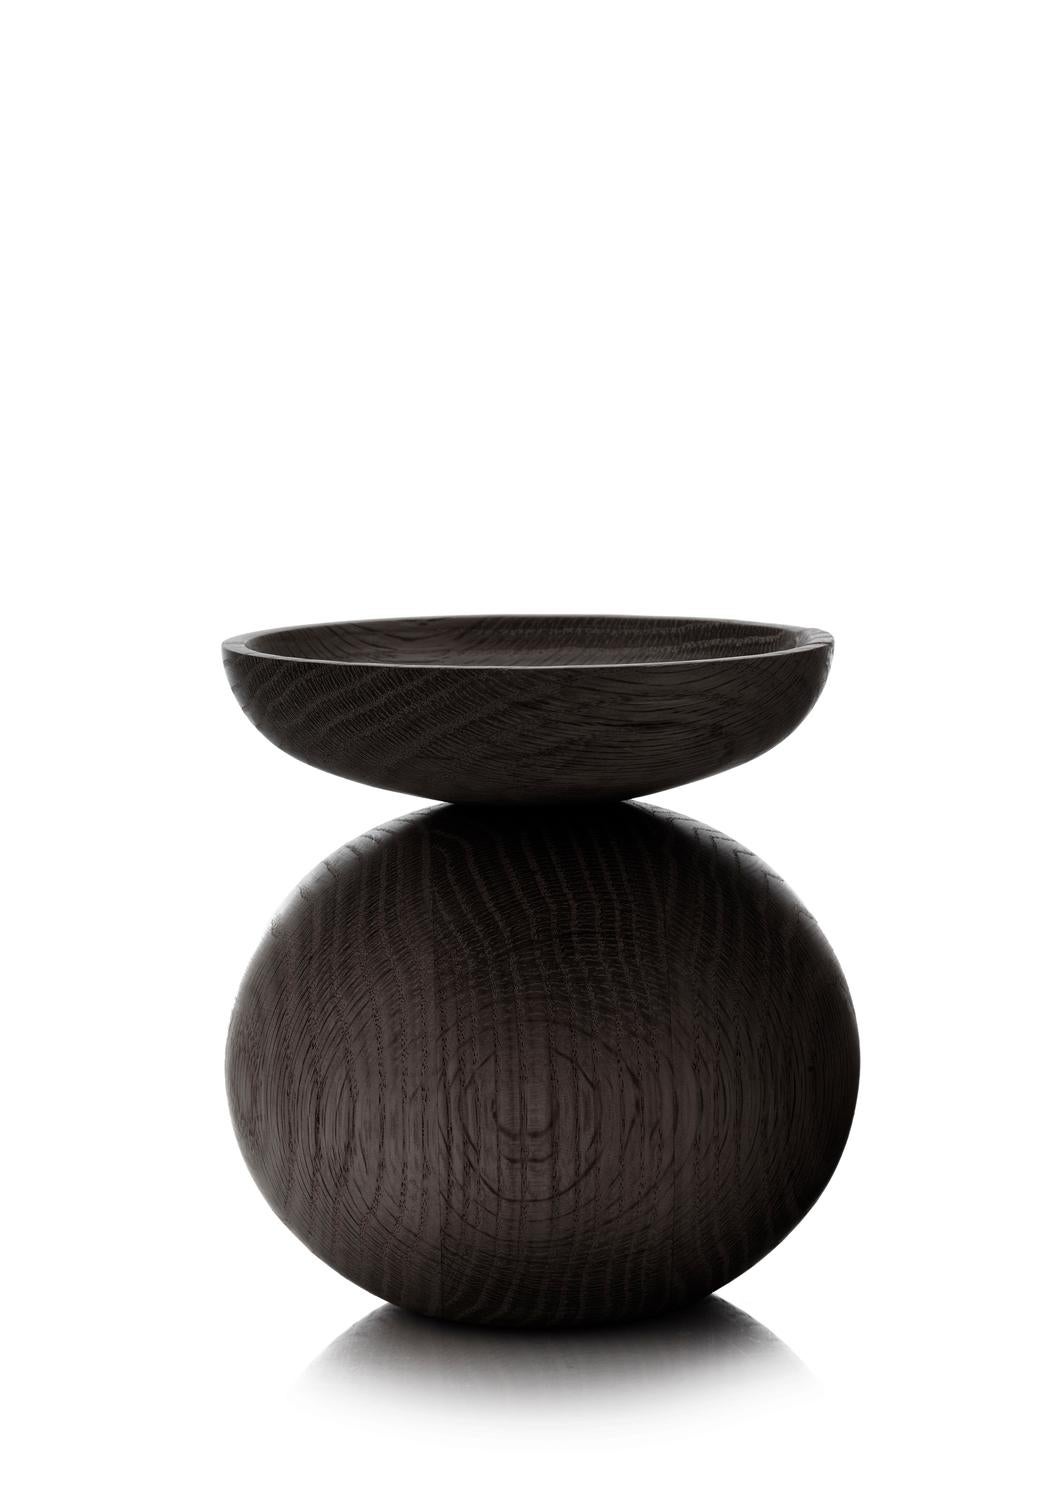 Bowl Shape Black Stained Oak Vase by Applicata For Sale 3